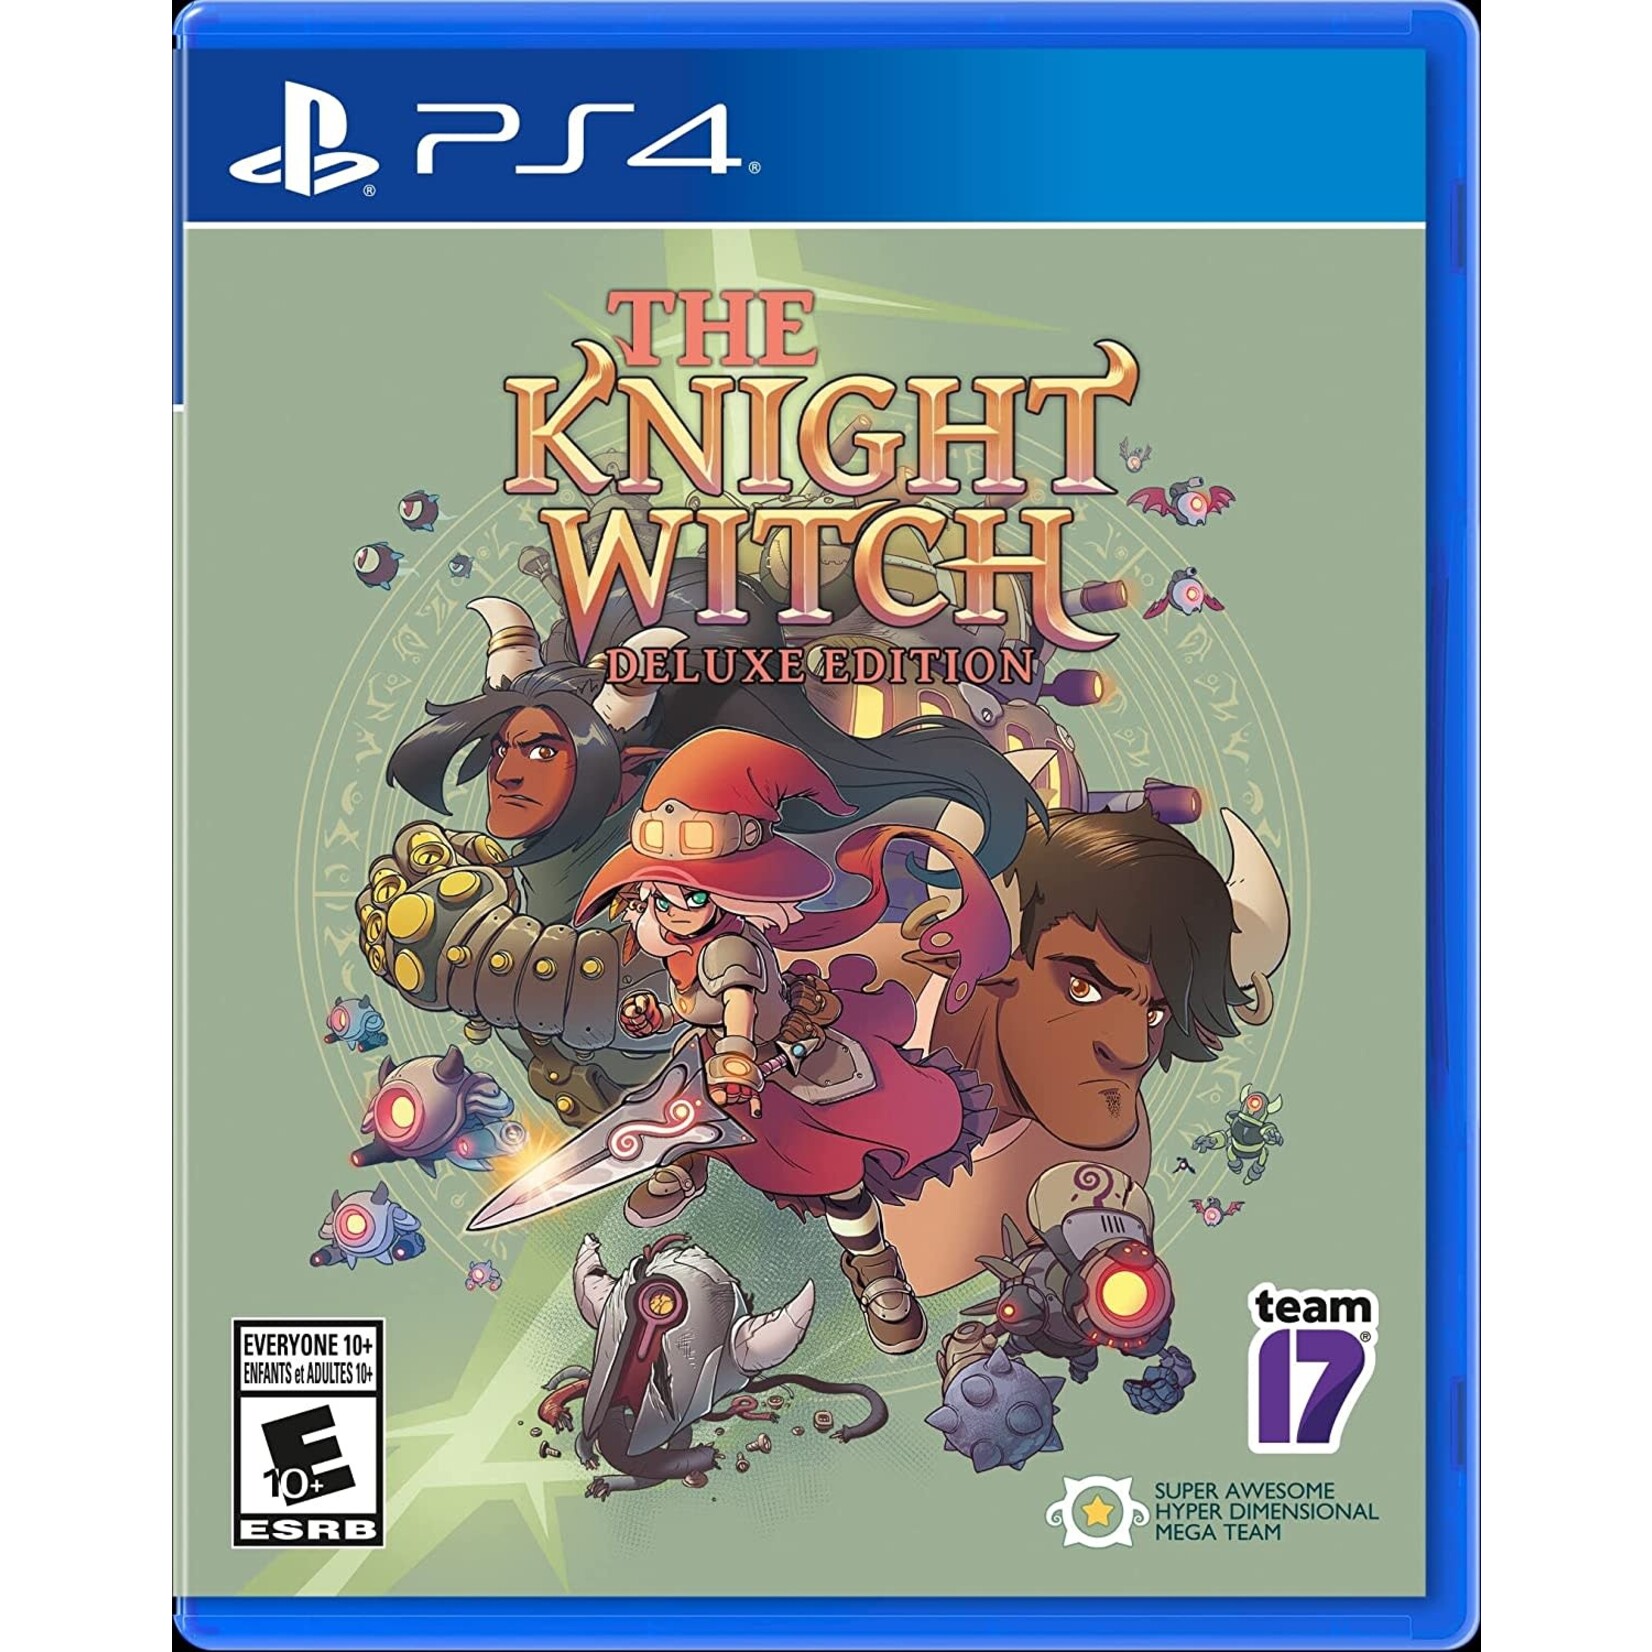 PS4-The Knight Witch